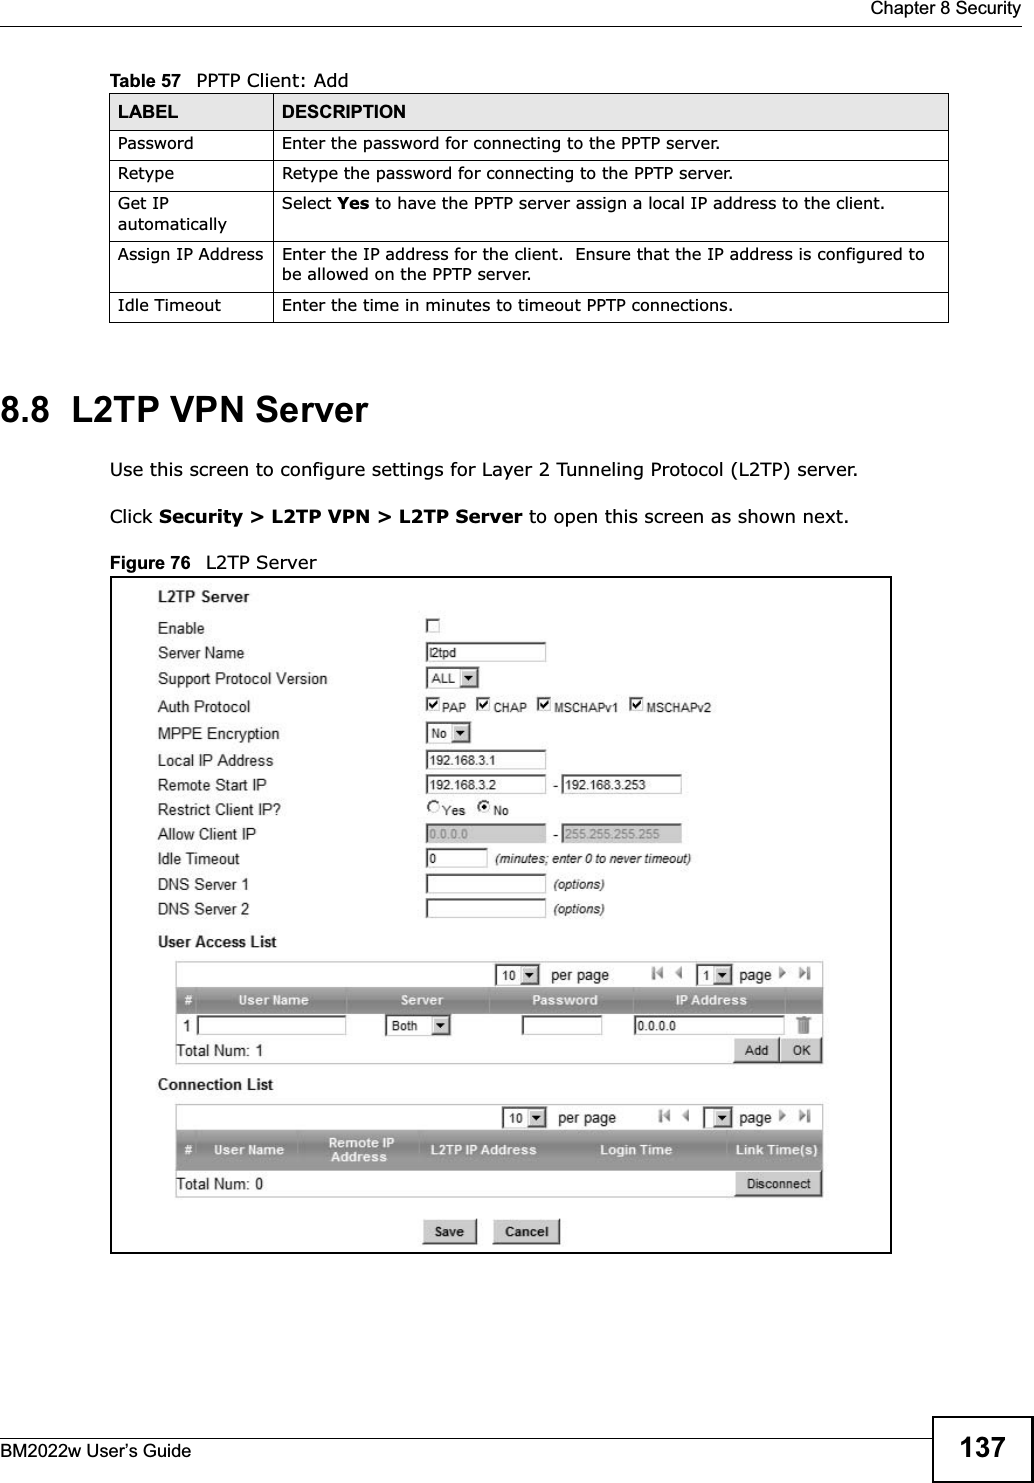  Chapter 8 SecurityBM2022w User’s Guide 1378.8  L2TP VPN ServerUse this screen to configure settings for Layer 2 Tunneling Protocol (L2TP) server.Click Security &gt; L2TP VPN &gt; L2TP Server to open this screen as shown next.Figure 76   L2TP ServerPassword Enter the password for connecting to the PPTP server.Retype Retype the password for connecting to the PPTP server.Get IP automaticallySelect Yes to have the PPTP server assign a local IP address to the client.Assign IP Address Enter the IP address for the client.  Ensure that the IP address is configured to be allowed on the PPTP server.Idle Timeout Enter the time in minutes to timeout PPTP connections.Table 57   PPTP Client: AddLABEL DESCRIPTION